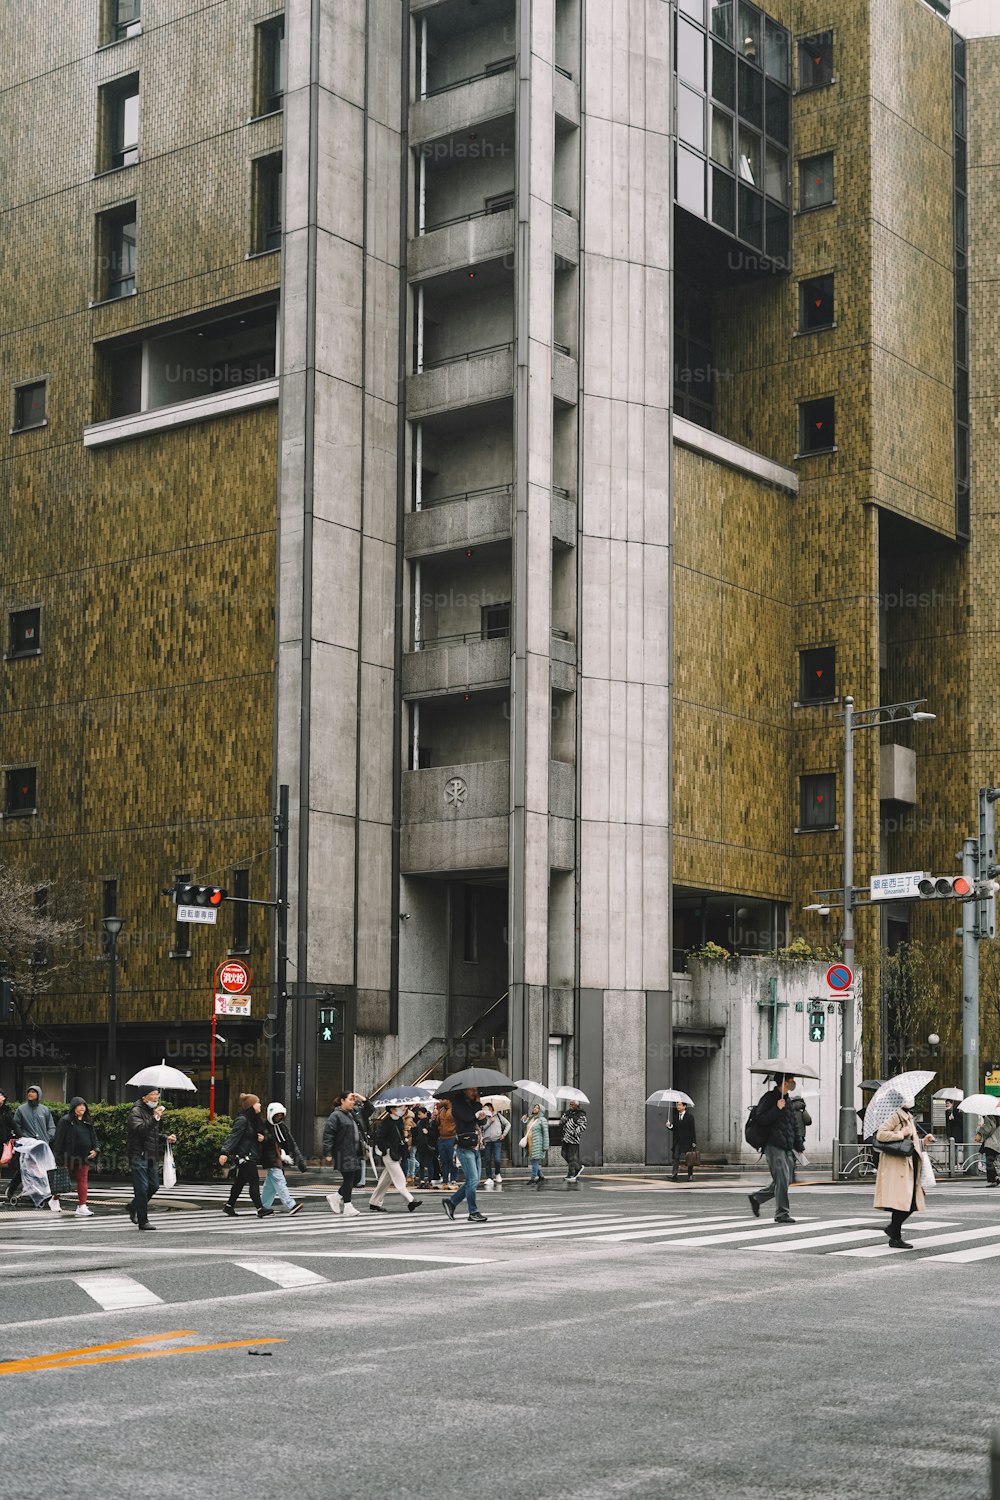 a group of people crossing a street in front of a tall building